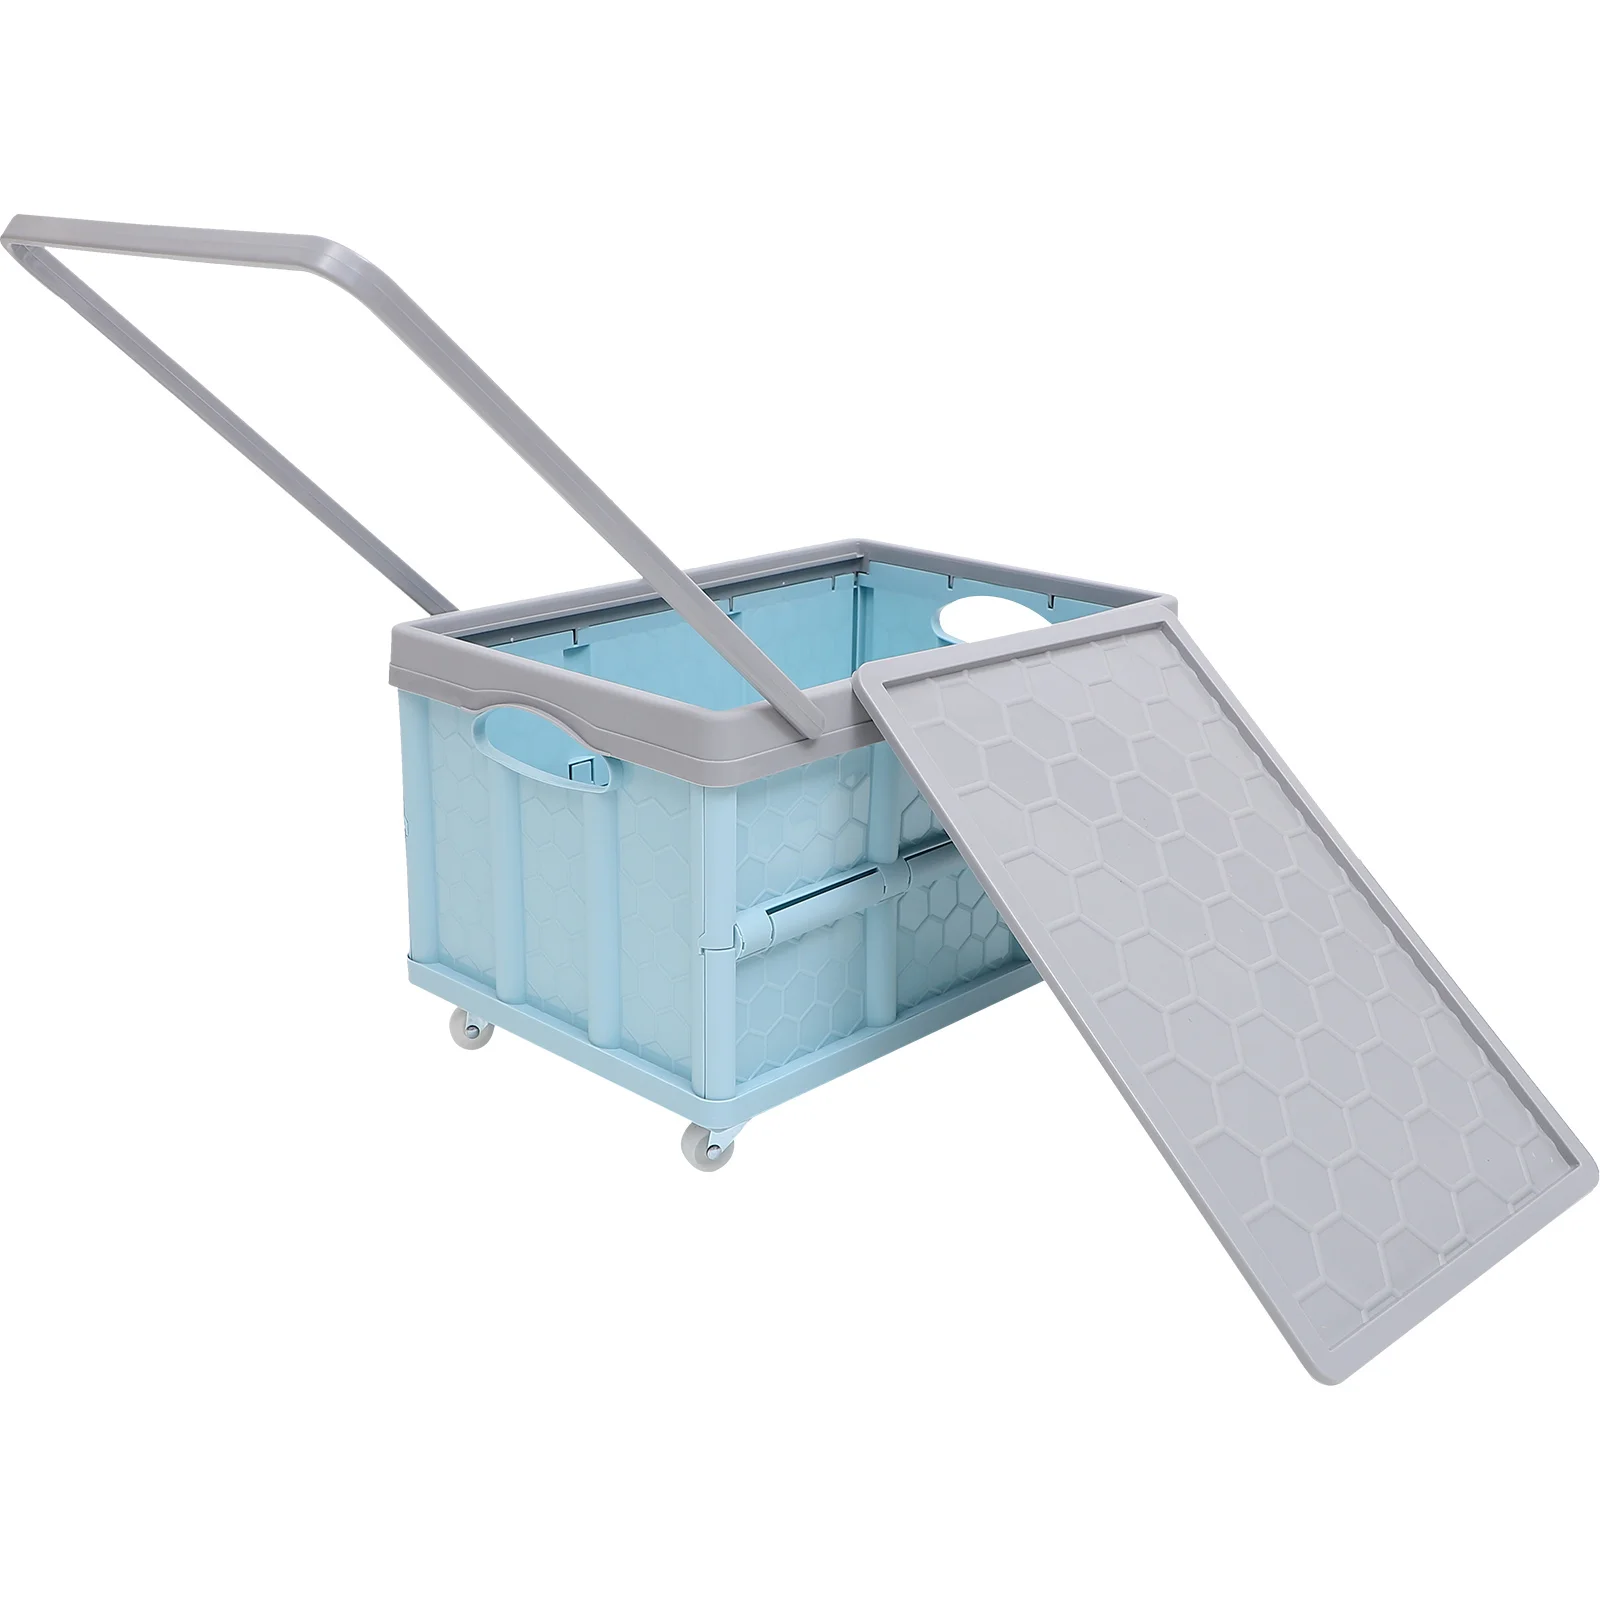 

English title: Alipis Rolling Crate Wheels Foldable Utility Clothes Organizer Bins HandClothes Organizer Bins Shopping Trolley